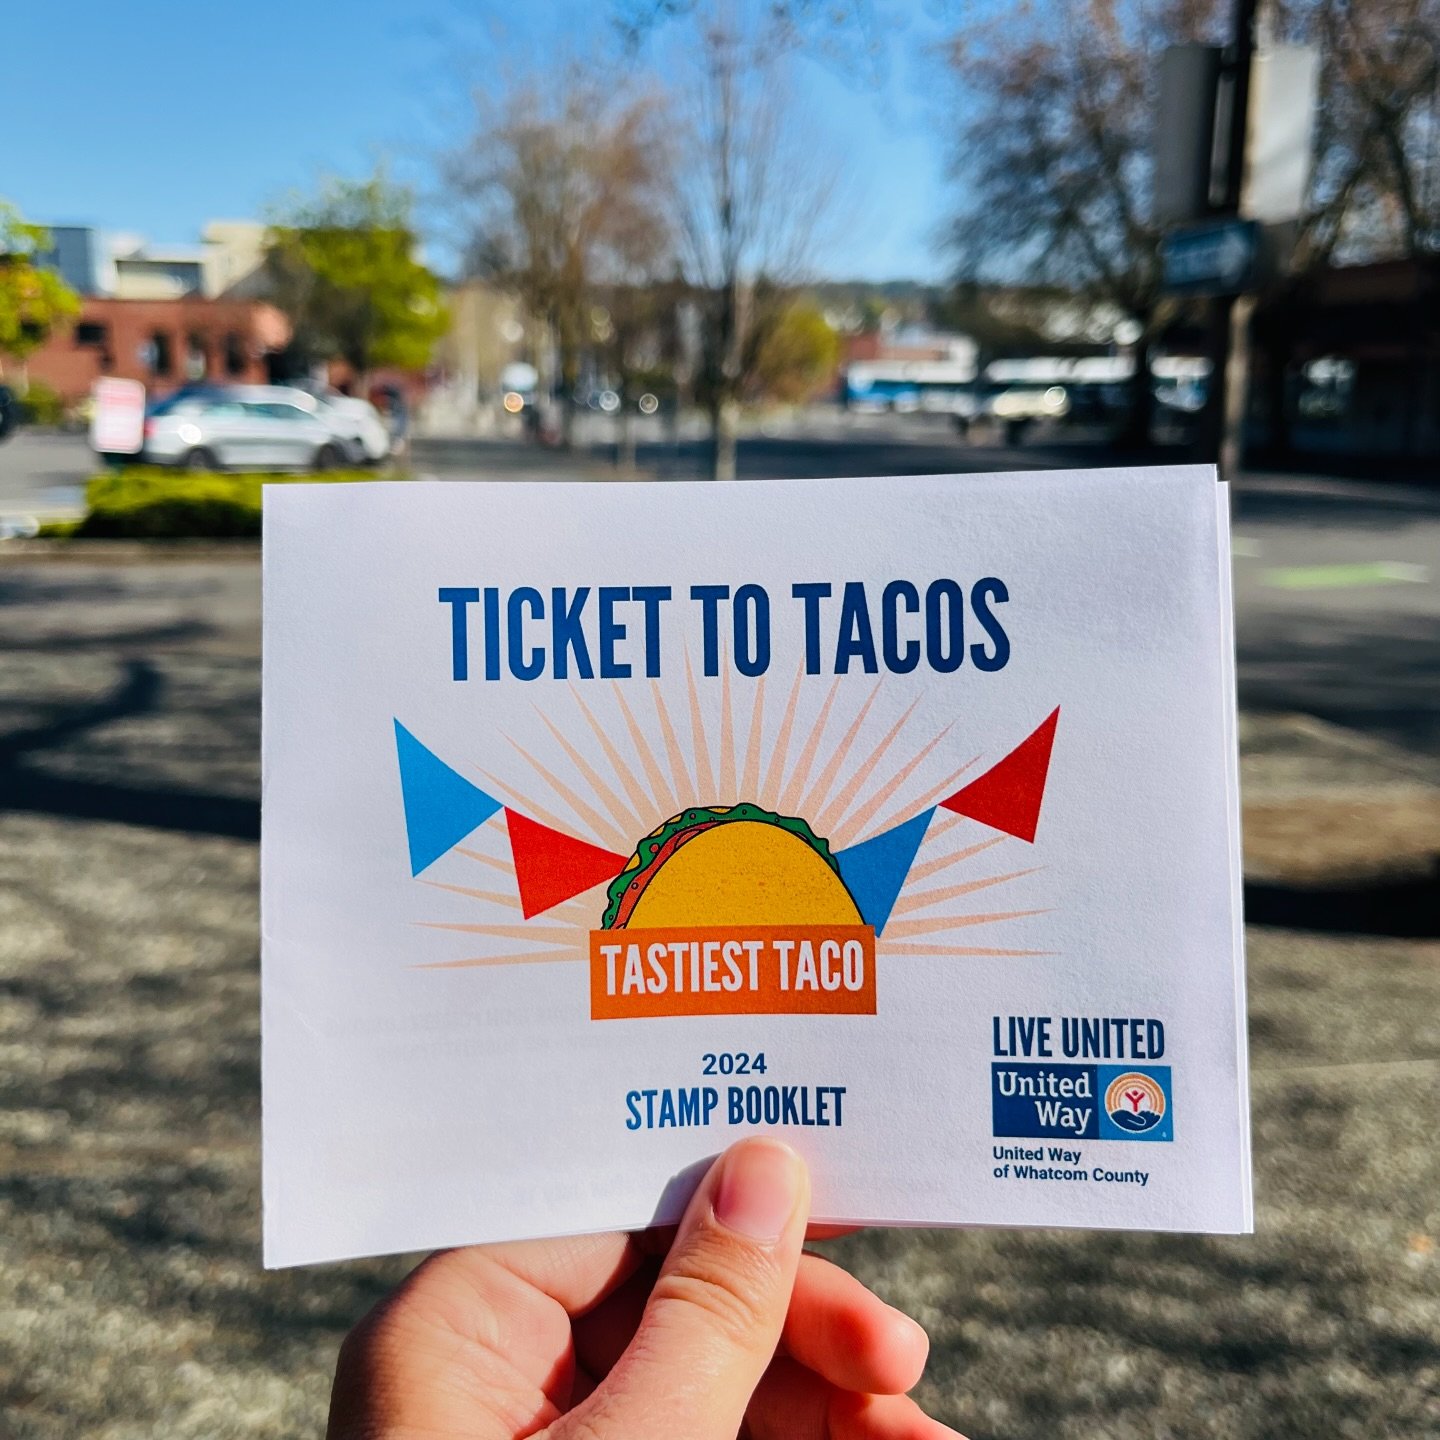 What&rsquo;s the tastiest taco in town?

With United Way&rsquo;s annual Tastiest Taco competition you can pick your favorite between 10 local tacos for just $30 from June 4th-July 16th, including 3 Downtown favorites:
🌶️ Black Sheep: Chicken Tinga o